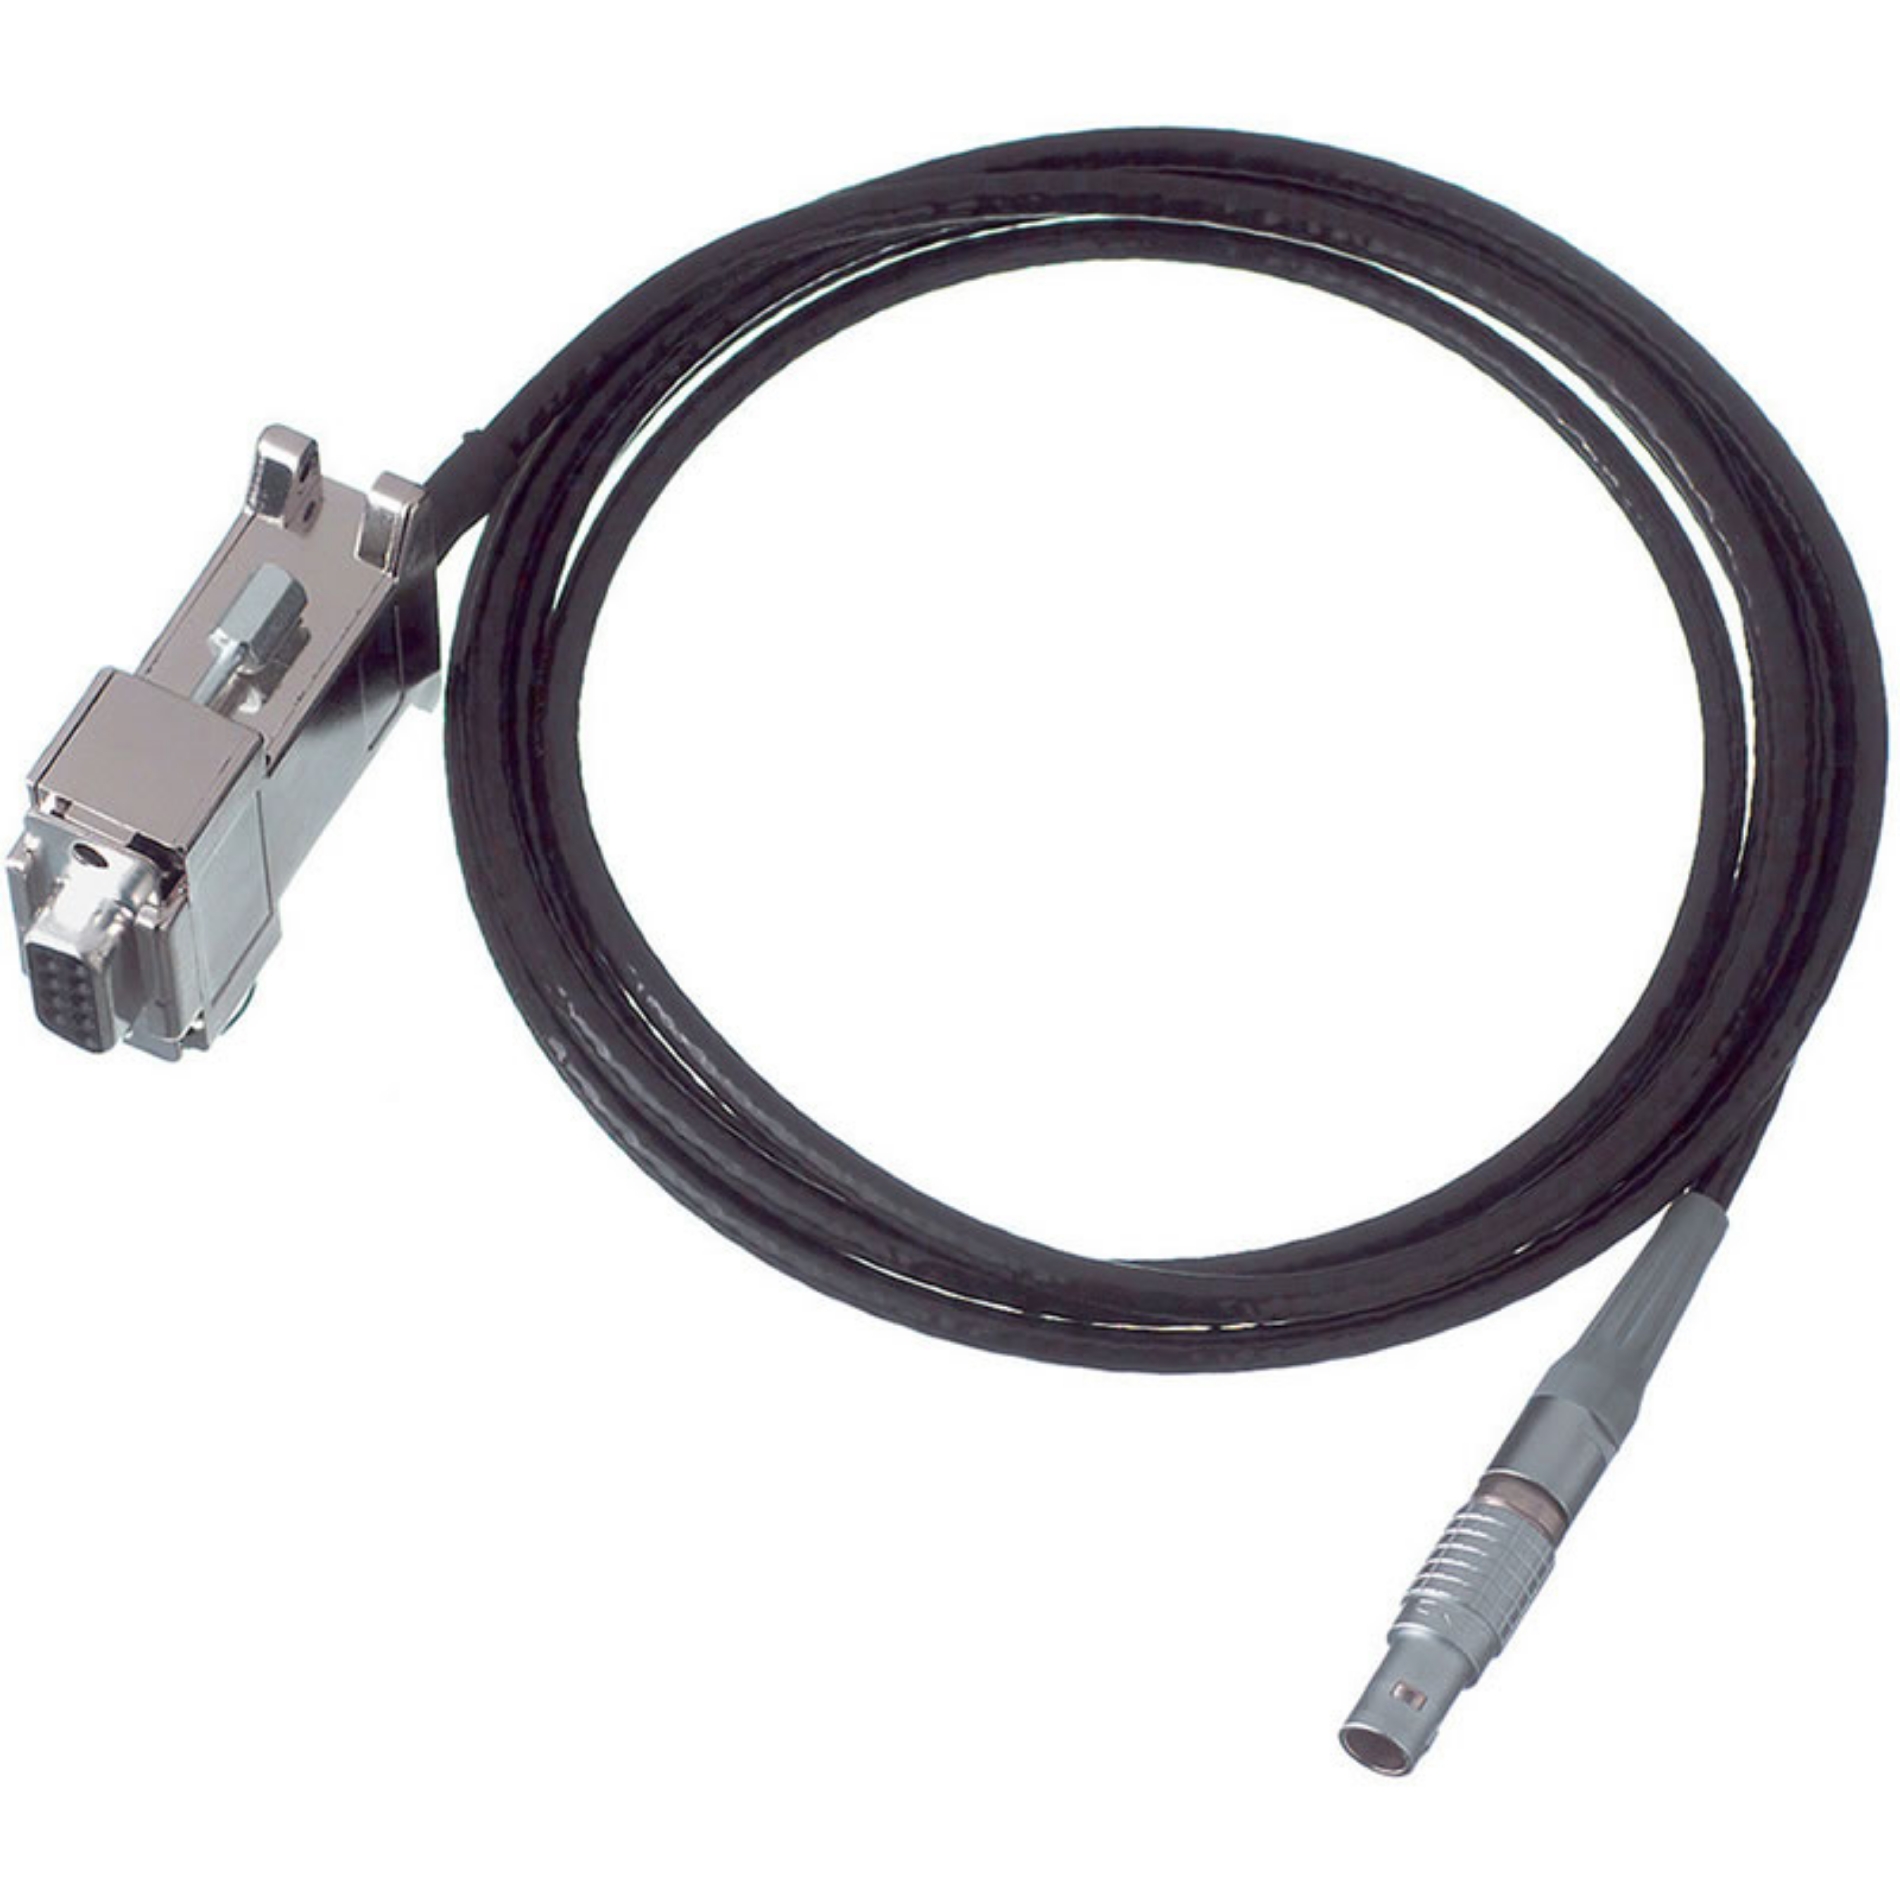 Picture of Leica GEV102 Data Transfer Cable